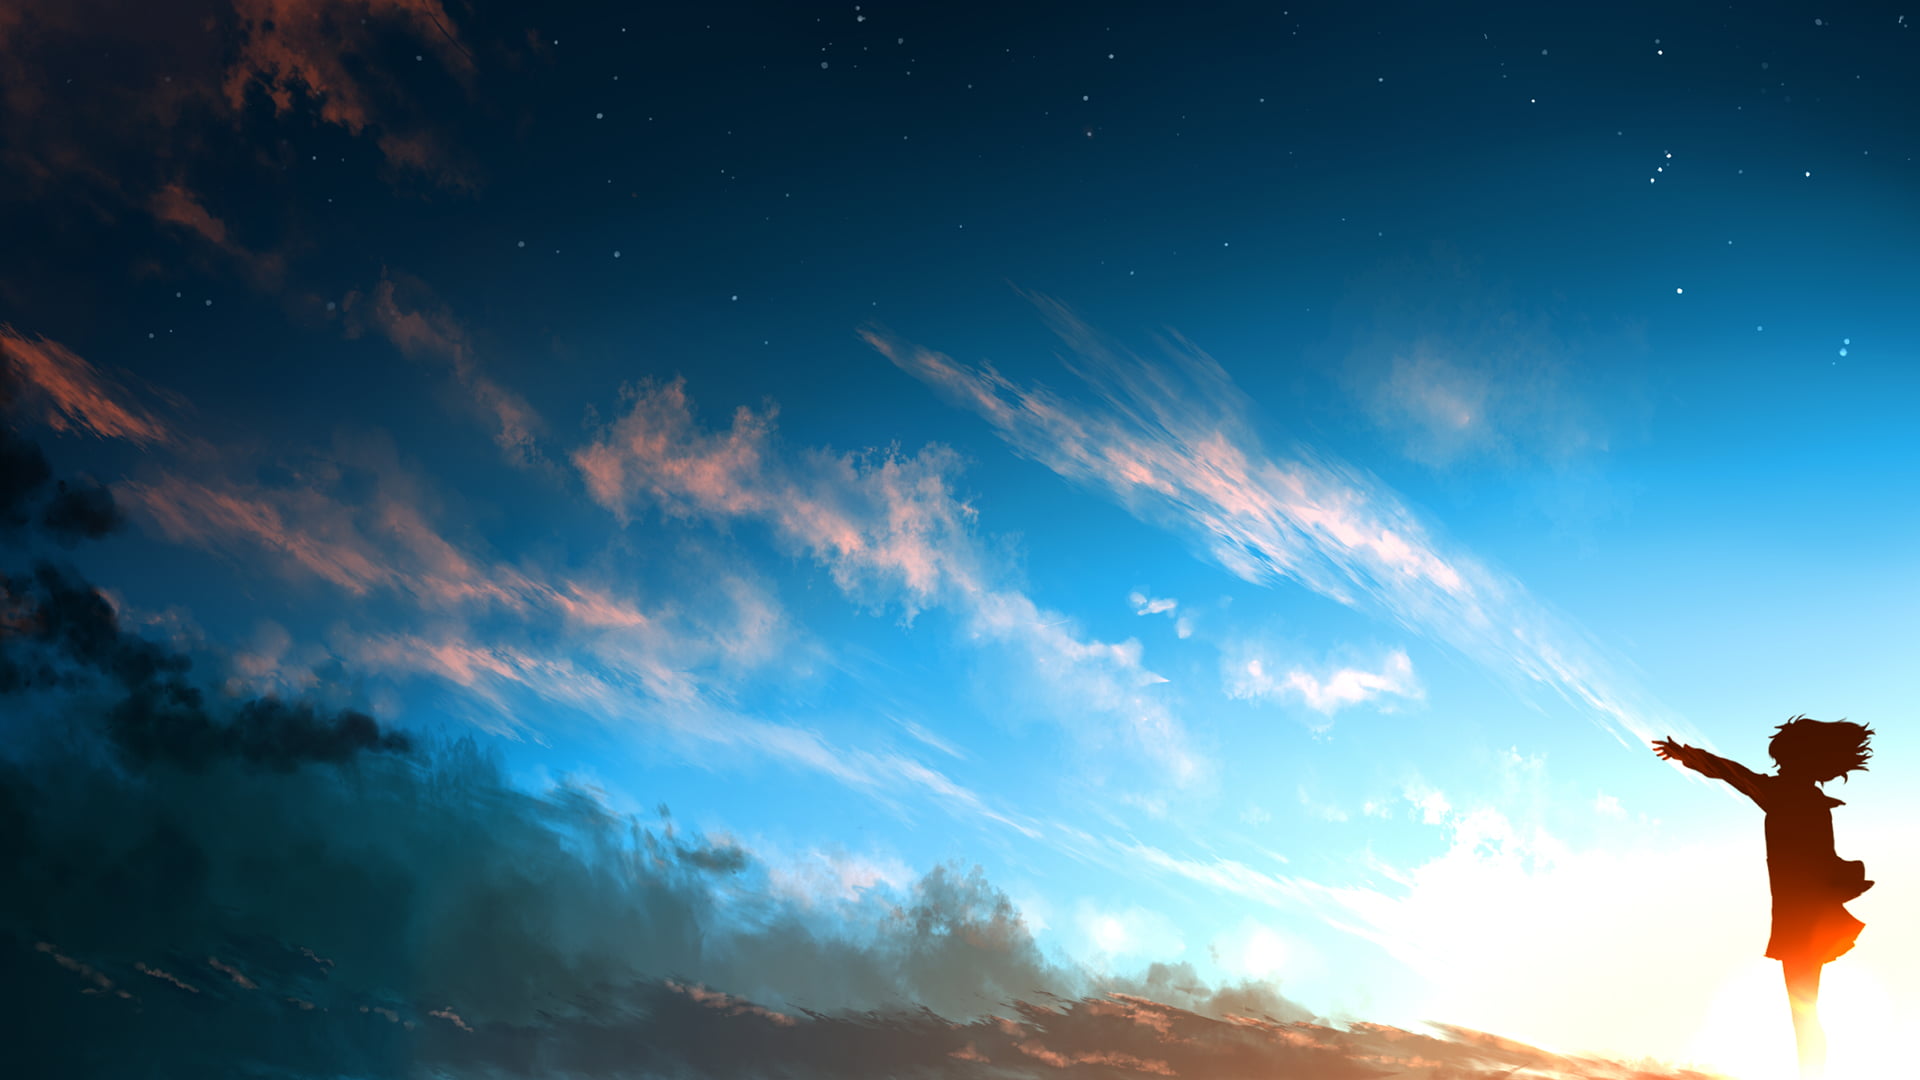 Anime Cloud - Other & Anime Background Wallpapers on Desktop Nexus (Image  1350166)